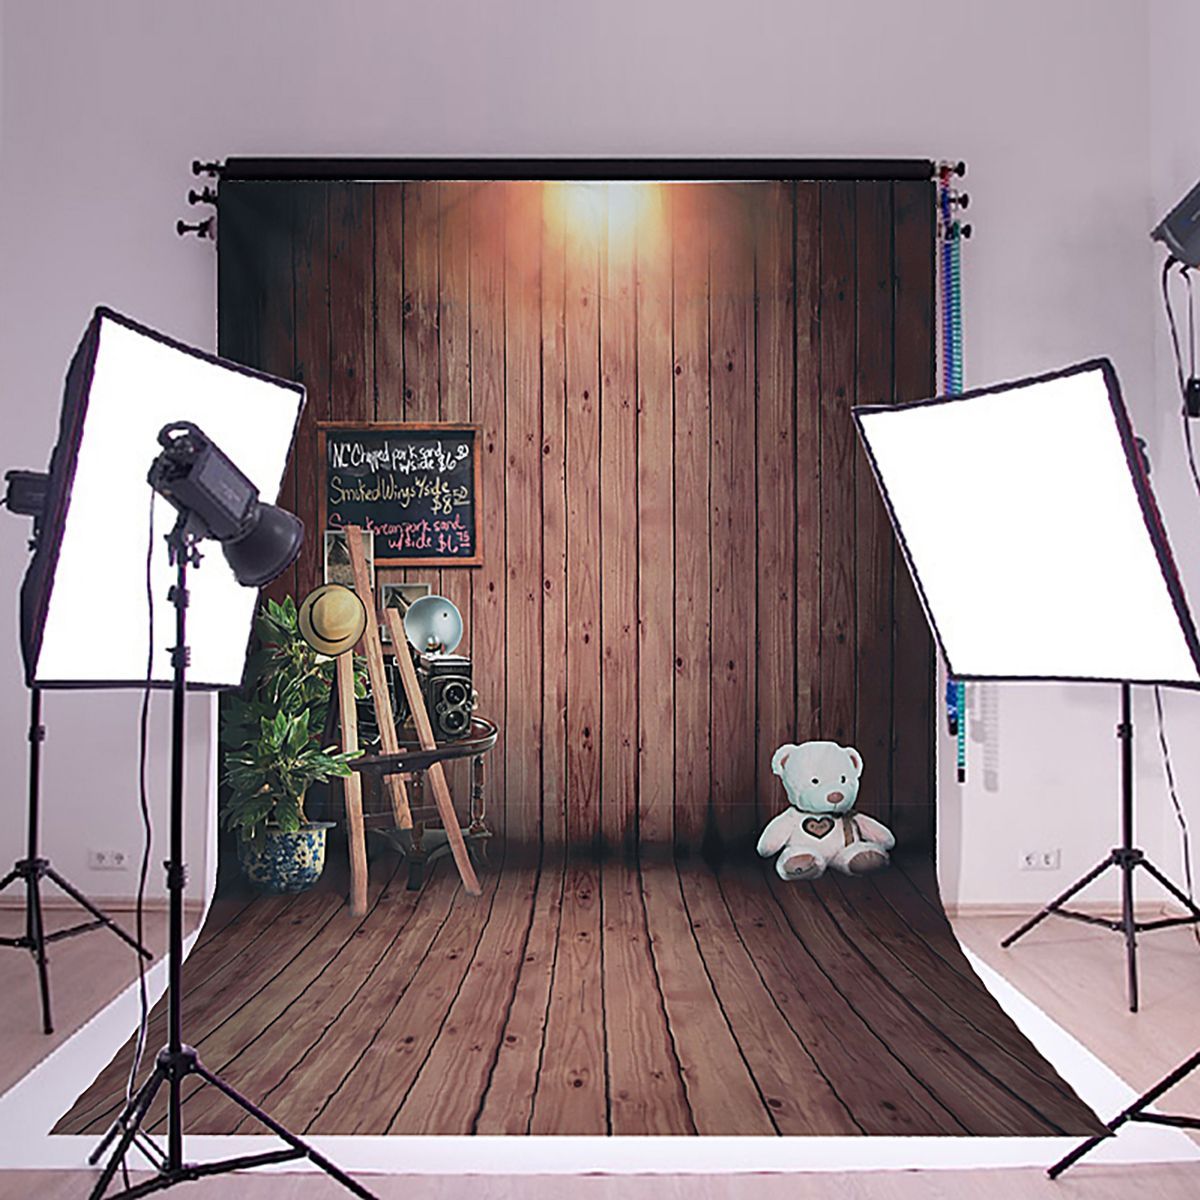 210X150CM-Wall-Paper-Photography-Backdrop-Studio-Photo-Props-Backgrounds-Decorations-1441197